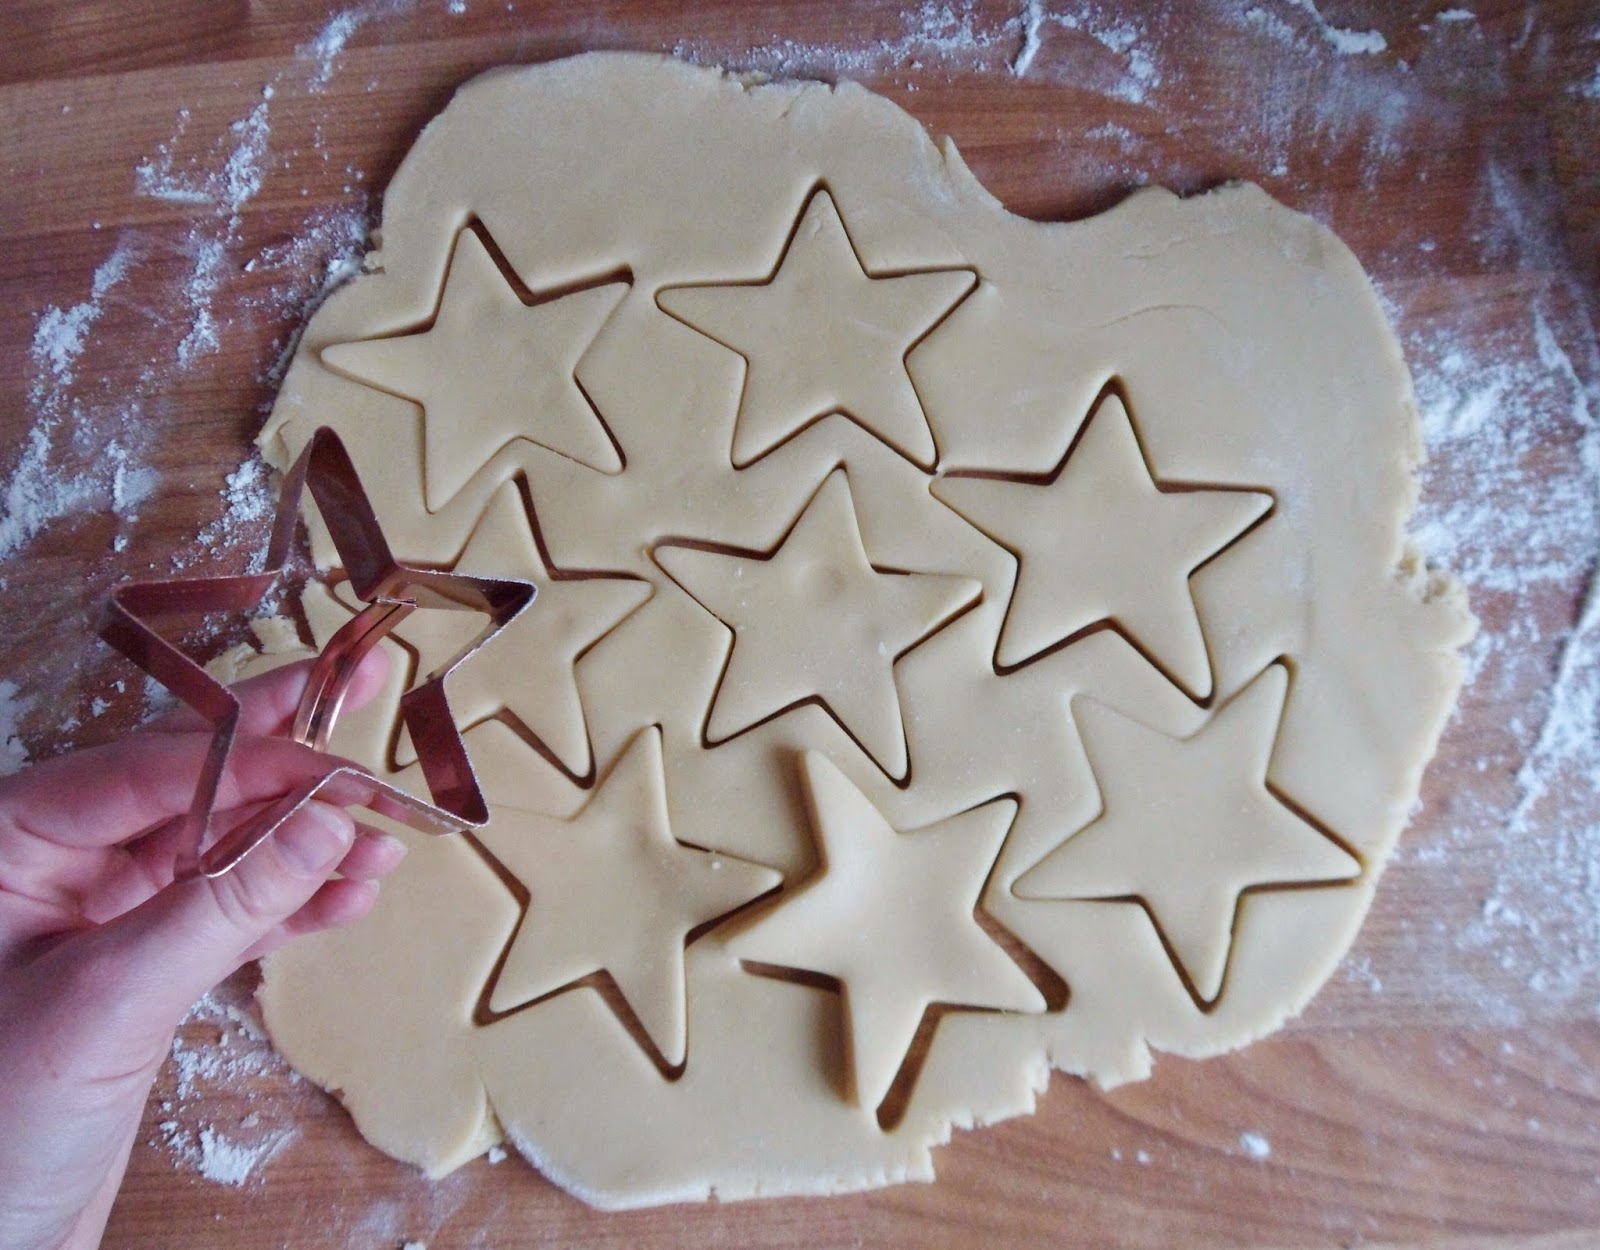 fbloggers, cooking, lifestyle, lifestylebloggers, lbloggers, christmas, christmascookies, biscuits, baking